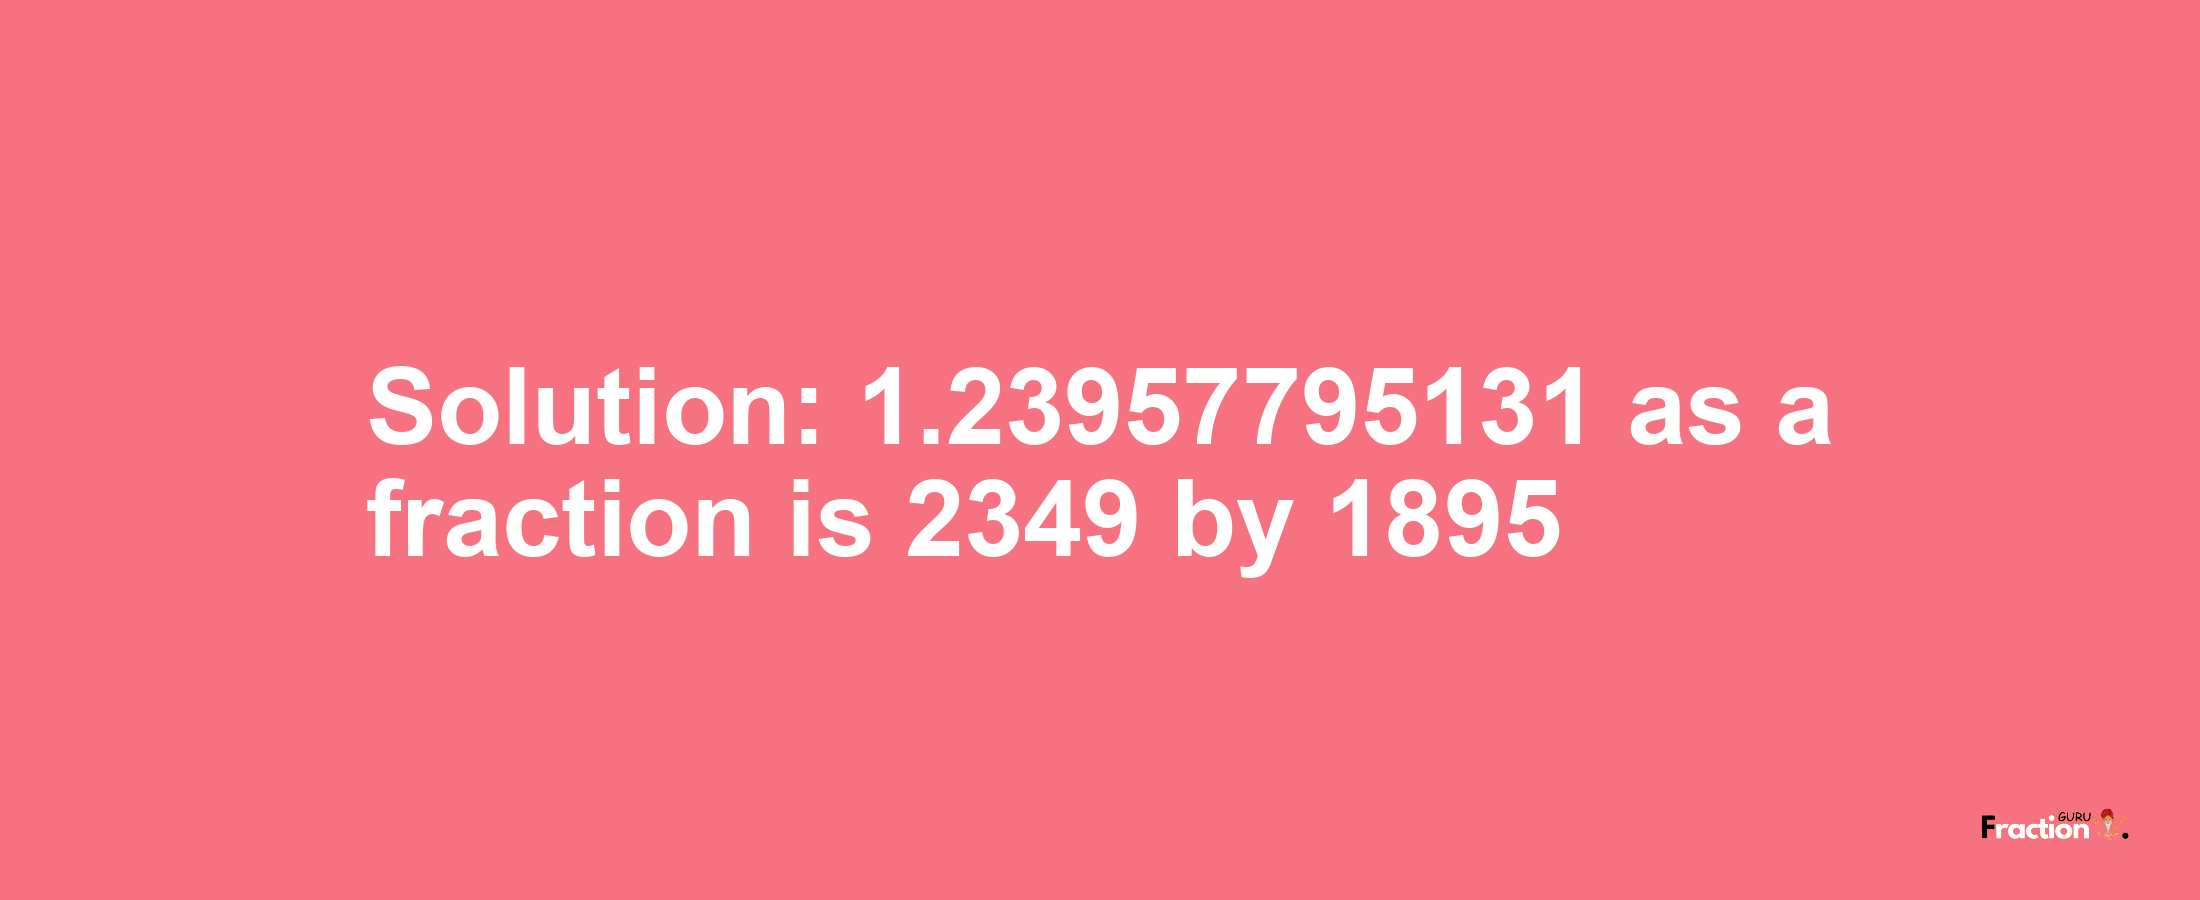 Solution:1.23957795131 as a fraction is 2349/1895